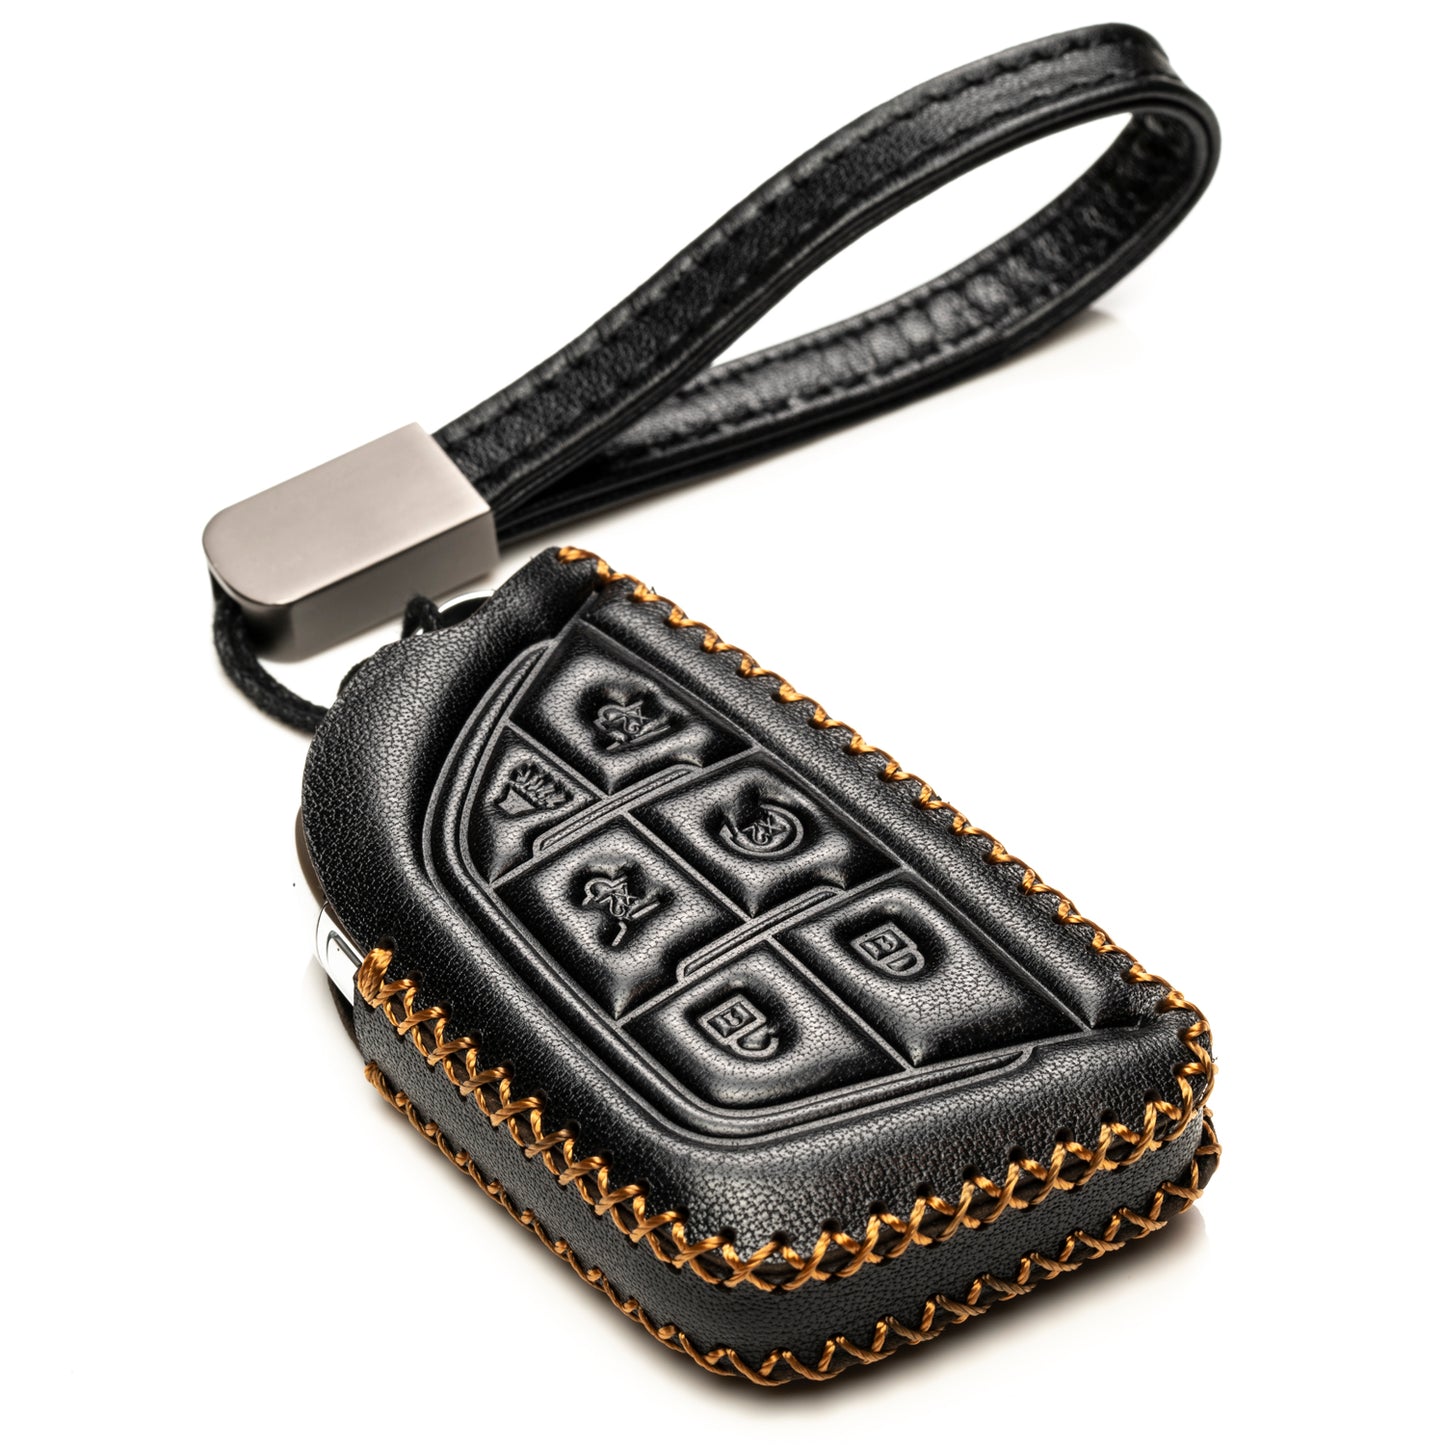 Vitodeco 6-Button Genuine Leather Smart Key Fob Remote Case with Leather Key Strap Compatible for Cadillac Escalade 2021-2024